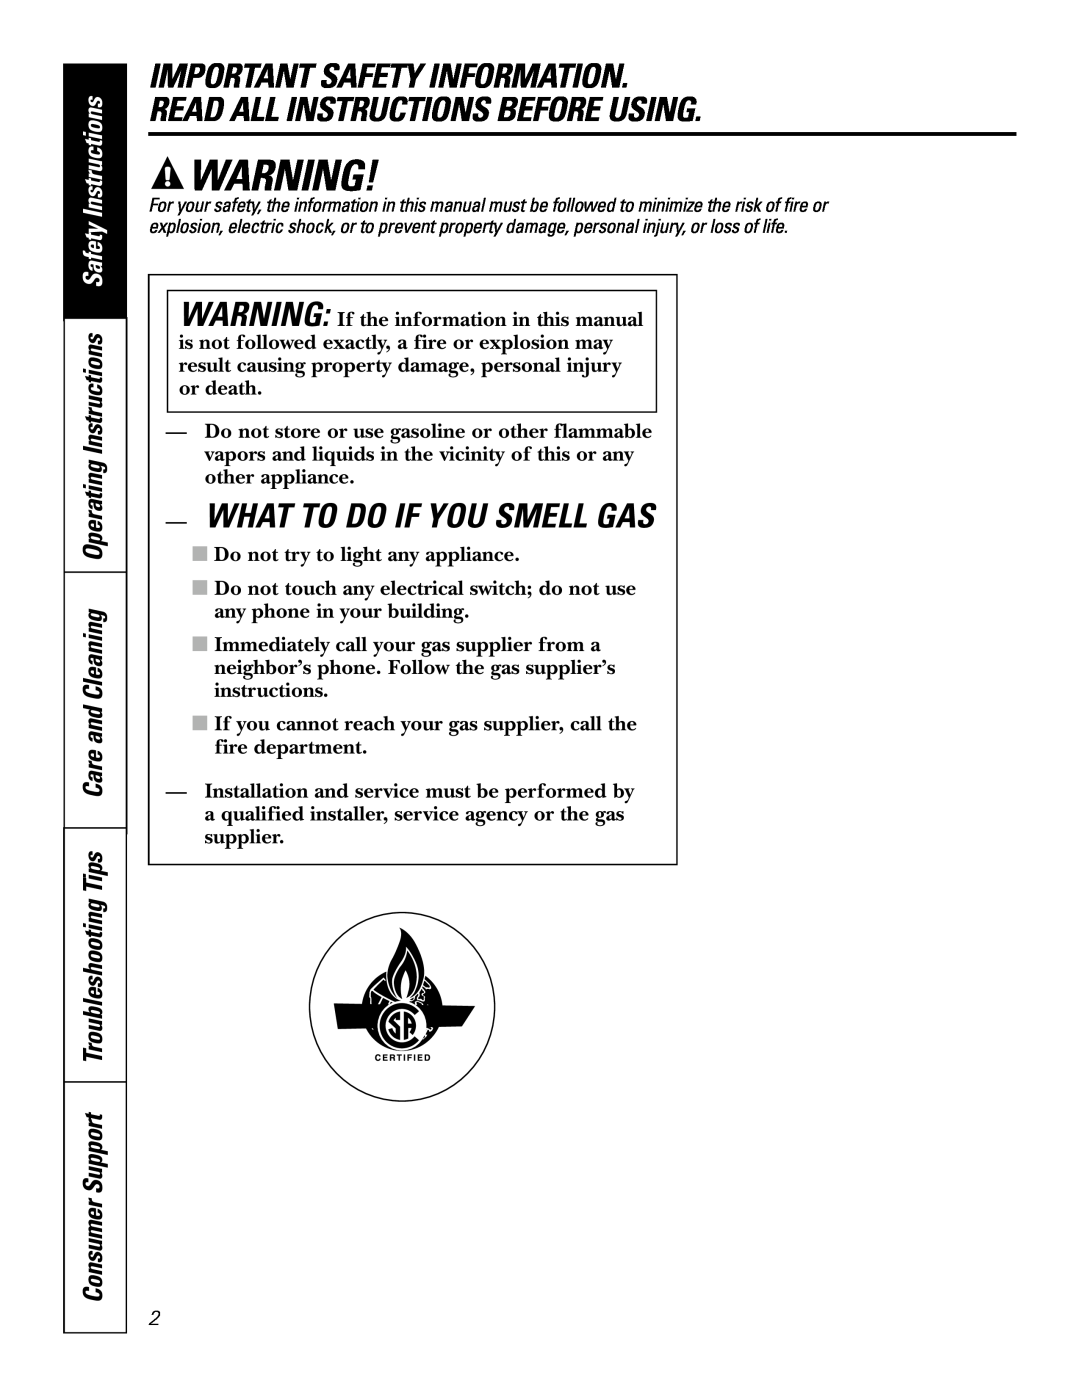 GE JGP989 manual What To Do If You Smell Gas 